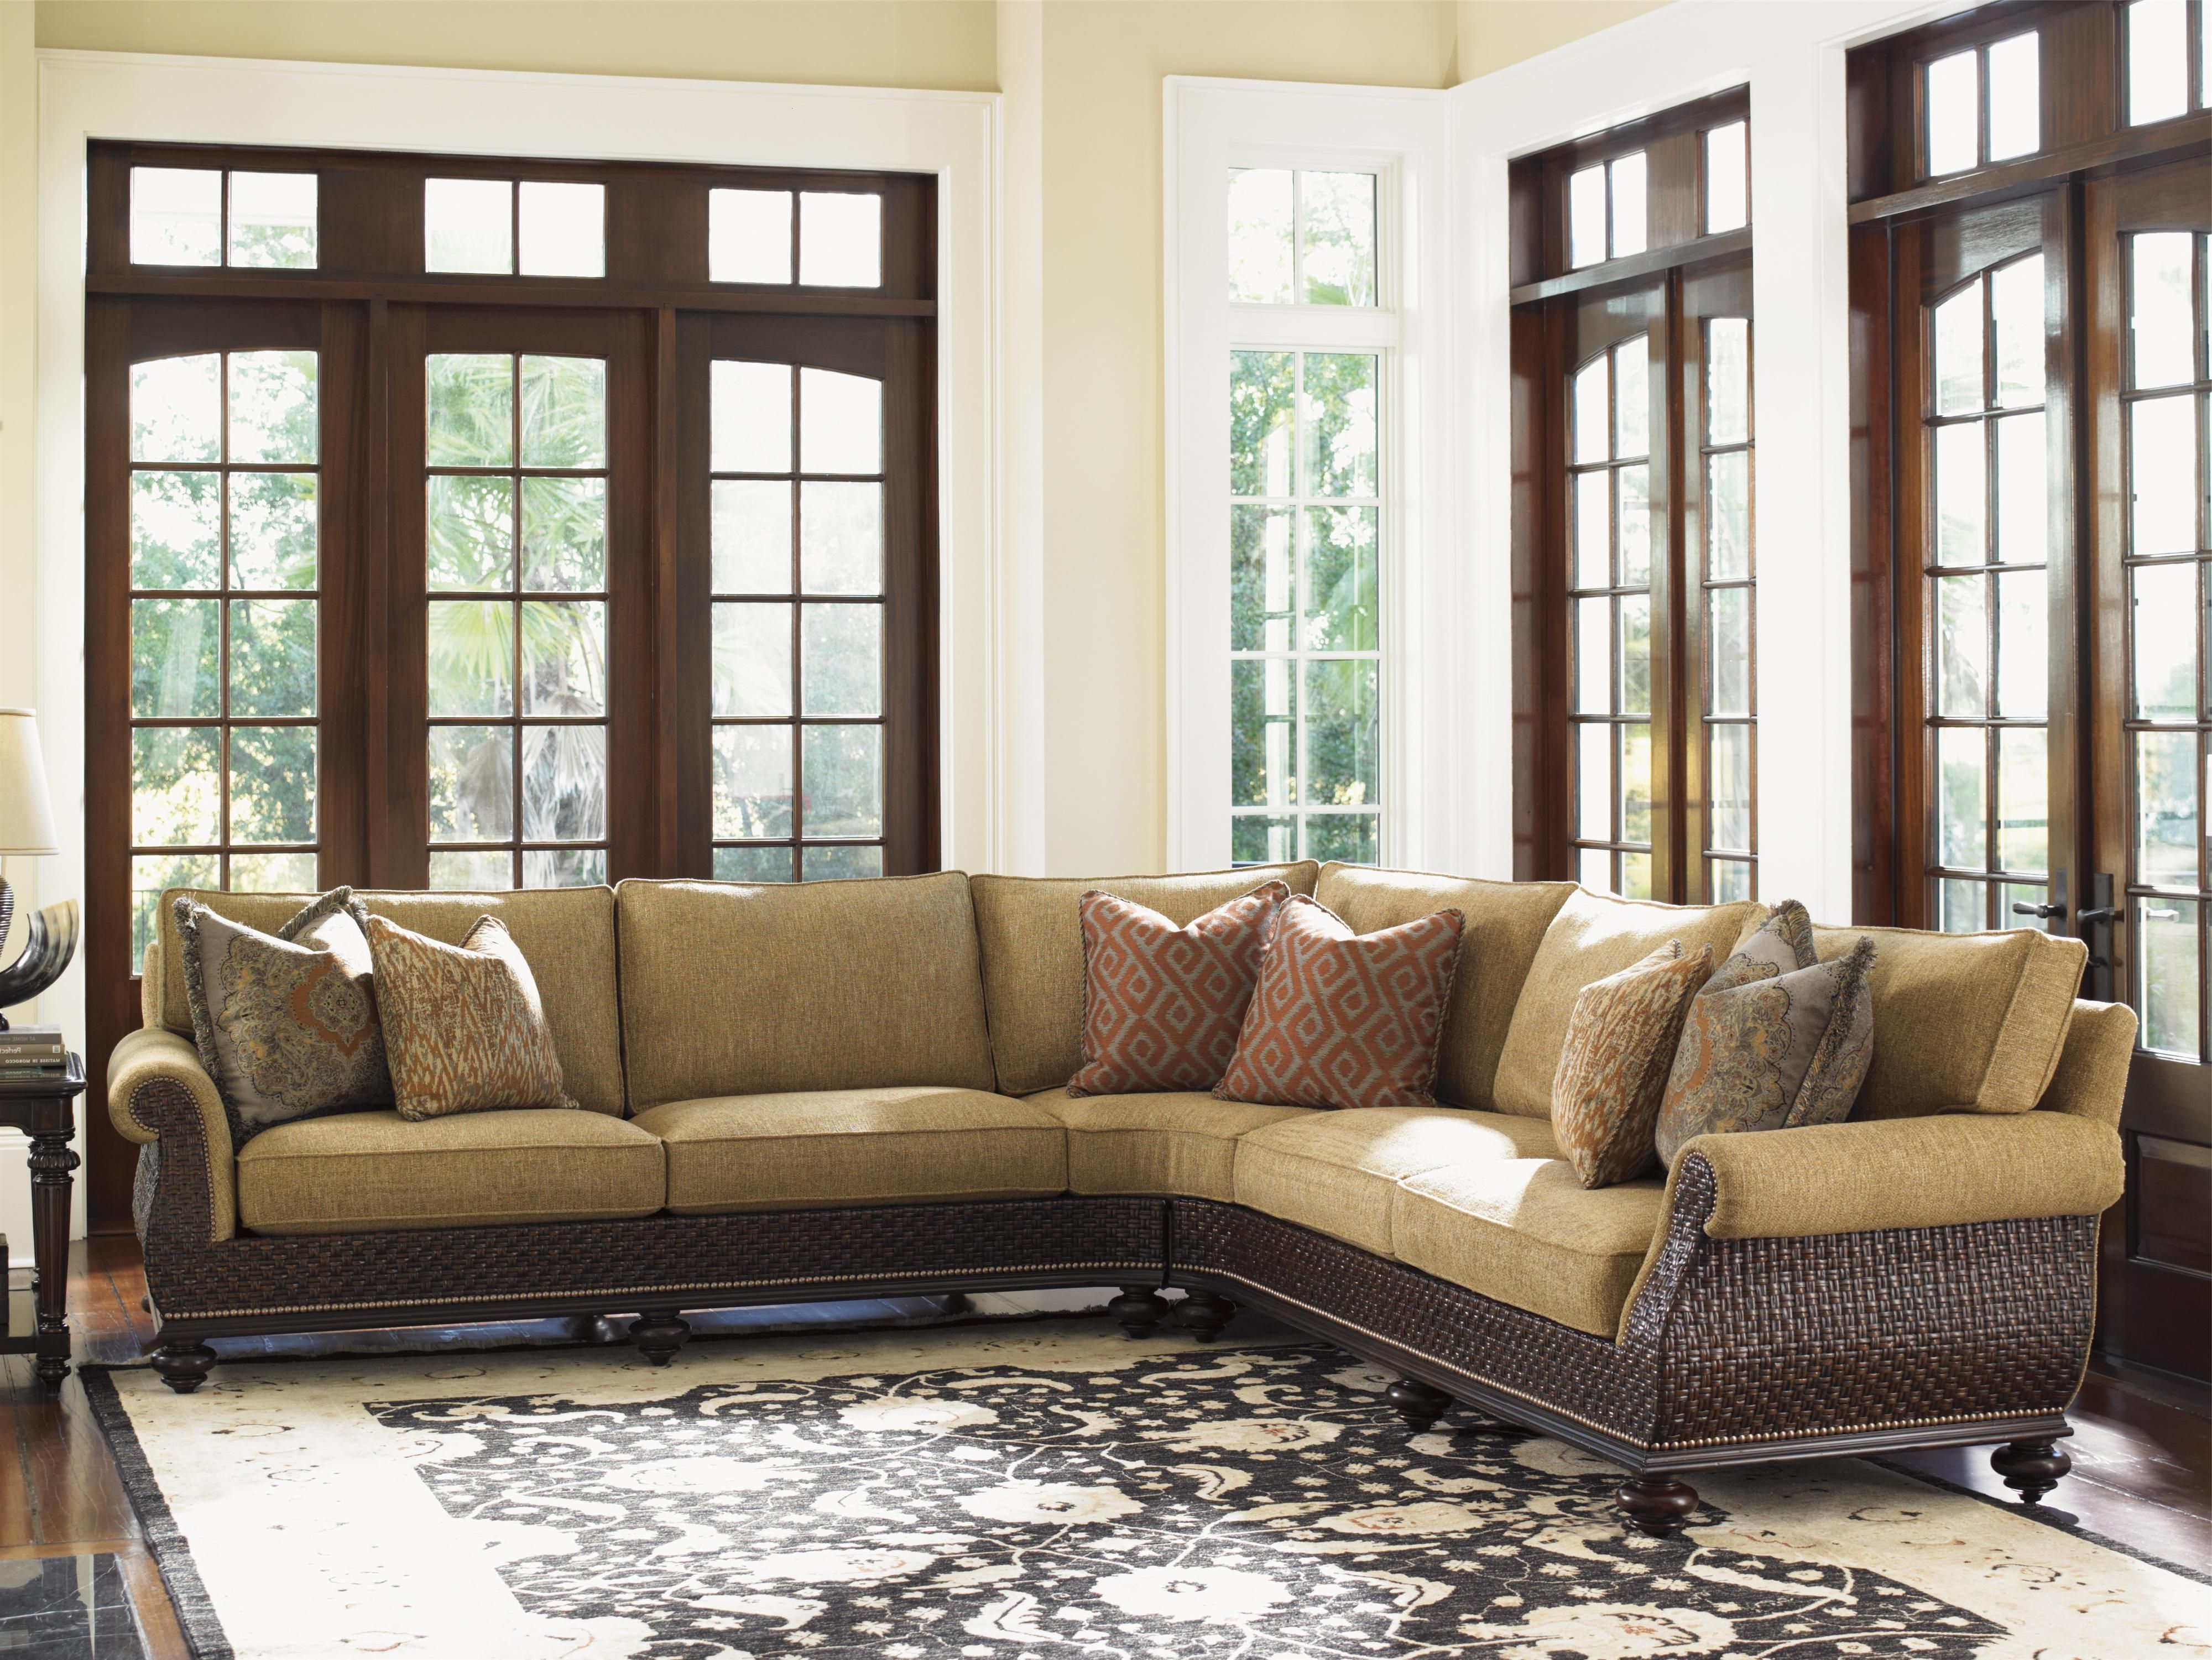 Hawaii Sectional Sofas Regarding Most Current Tommy Bahama Home Island Traditions Westbury Sectional Sofa With (View 1 of 20)